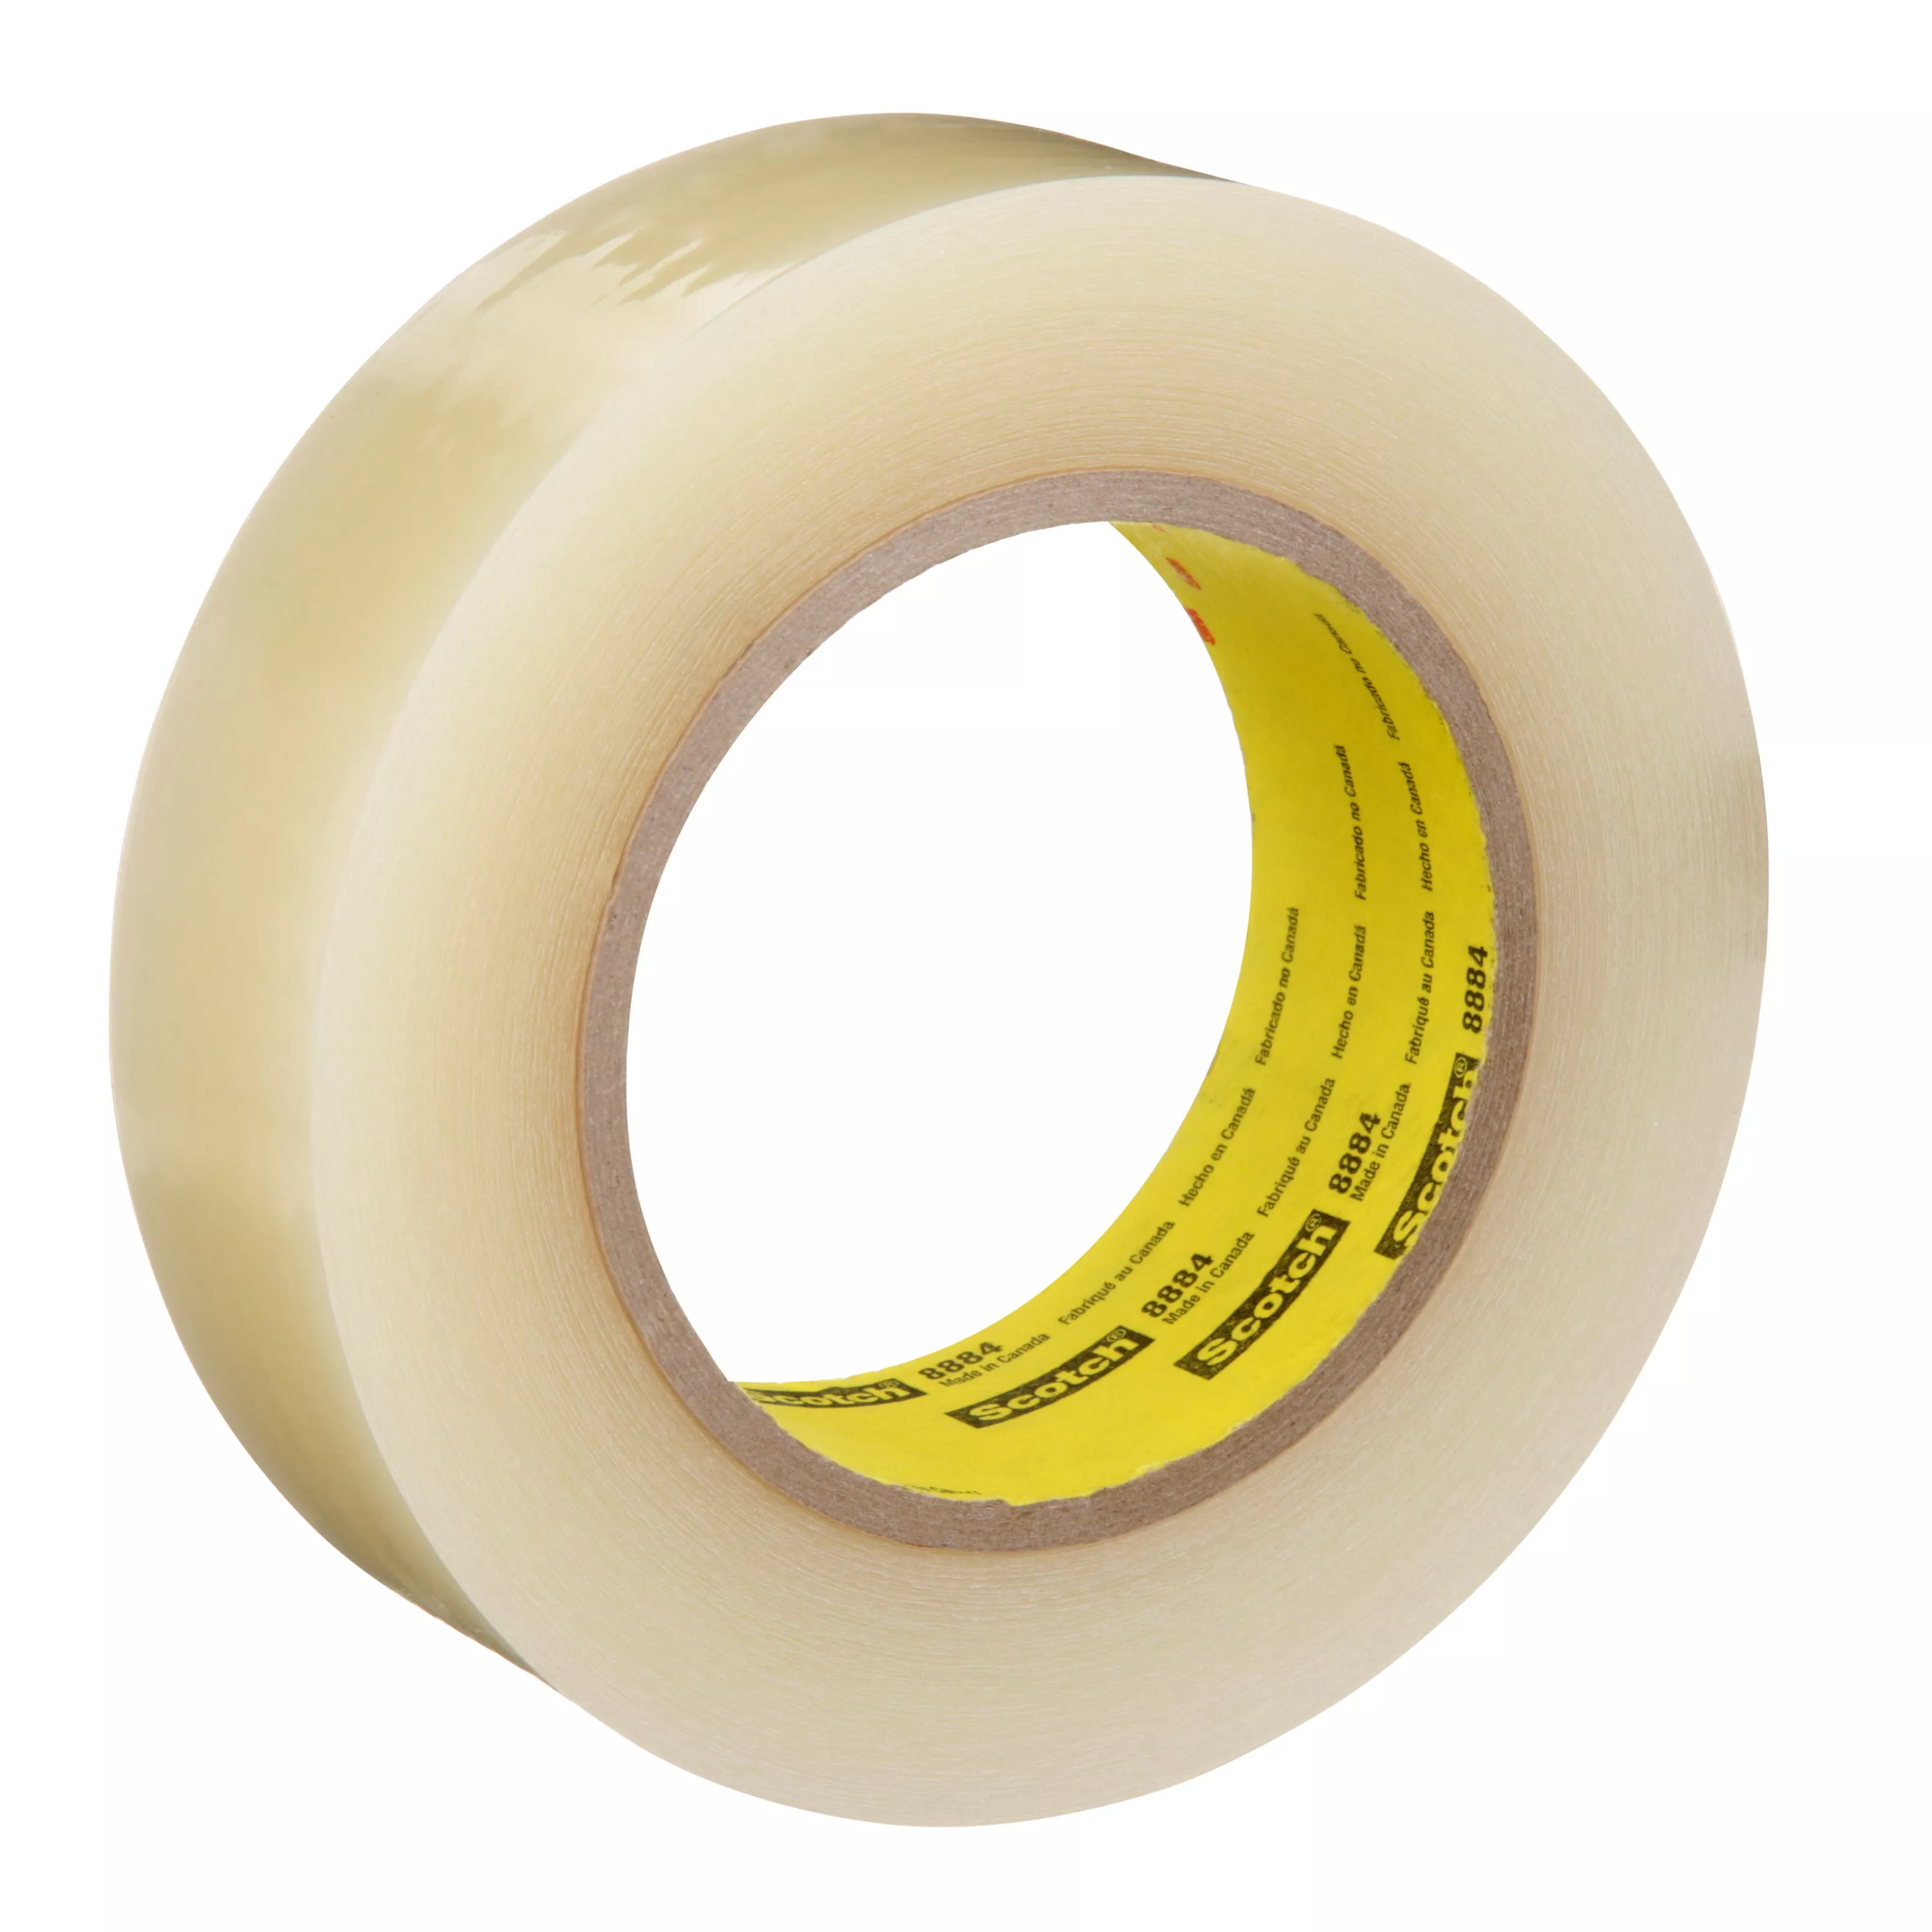 Scotch® Stretchable Tape 8884, Clear, 36 mm x 55 m, 5 mil, 24 Rolls/Case